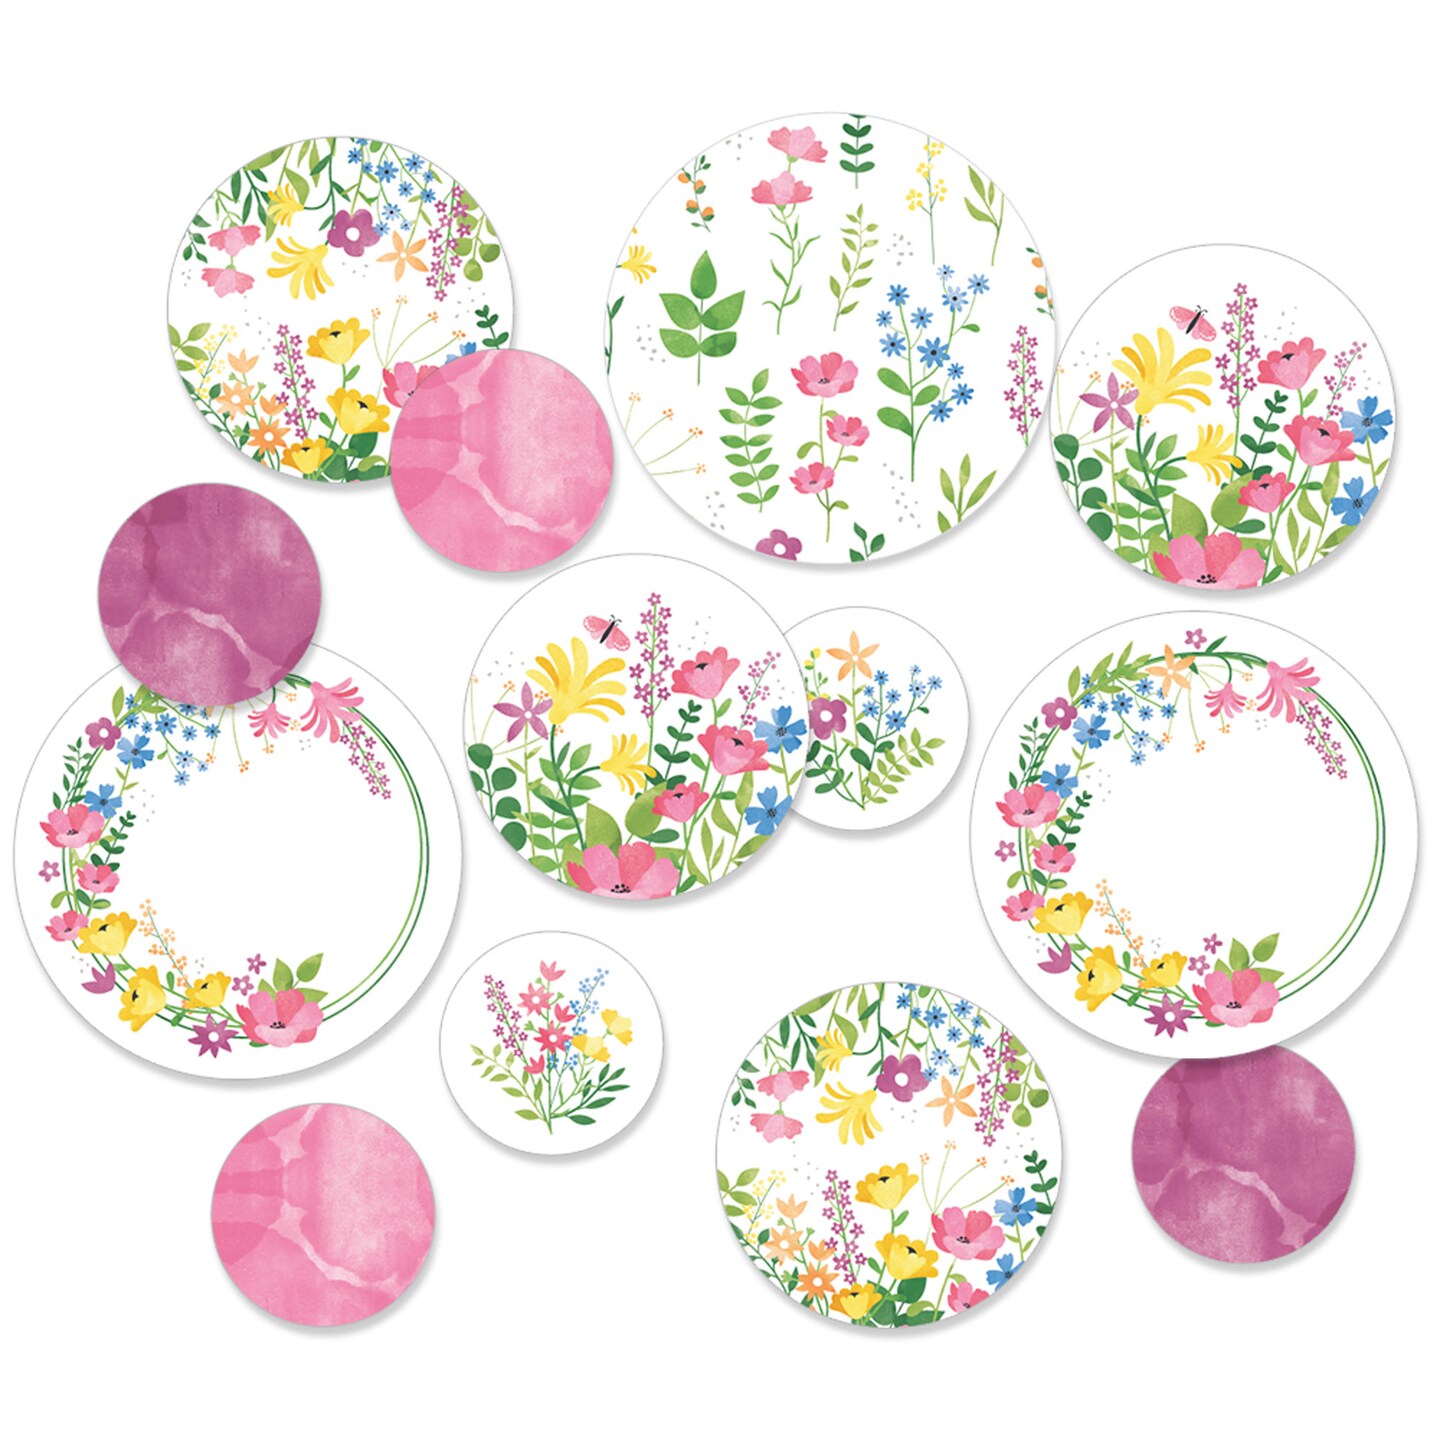 Big Dot of Happiness Wildflowers - Boho Floral Party Giant Circle Confetti - Party Decorations - Large Confetti 27 Count